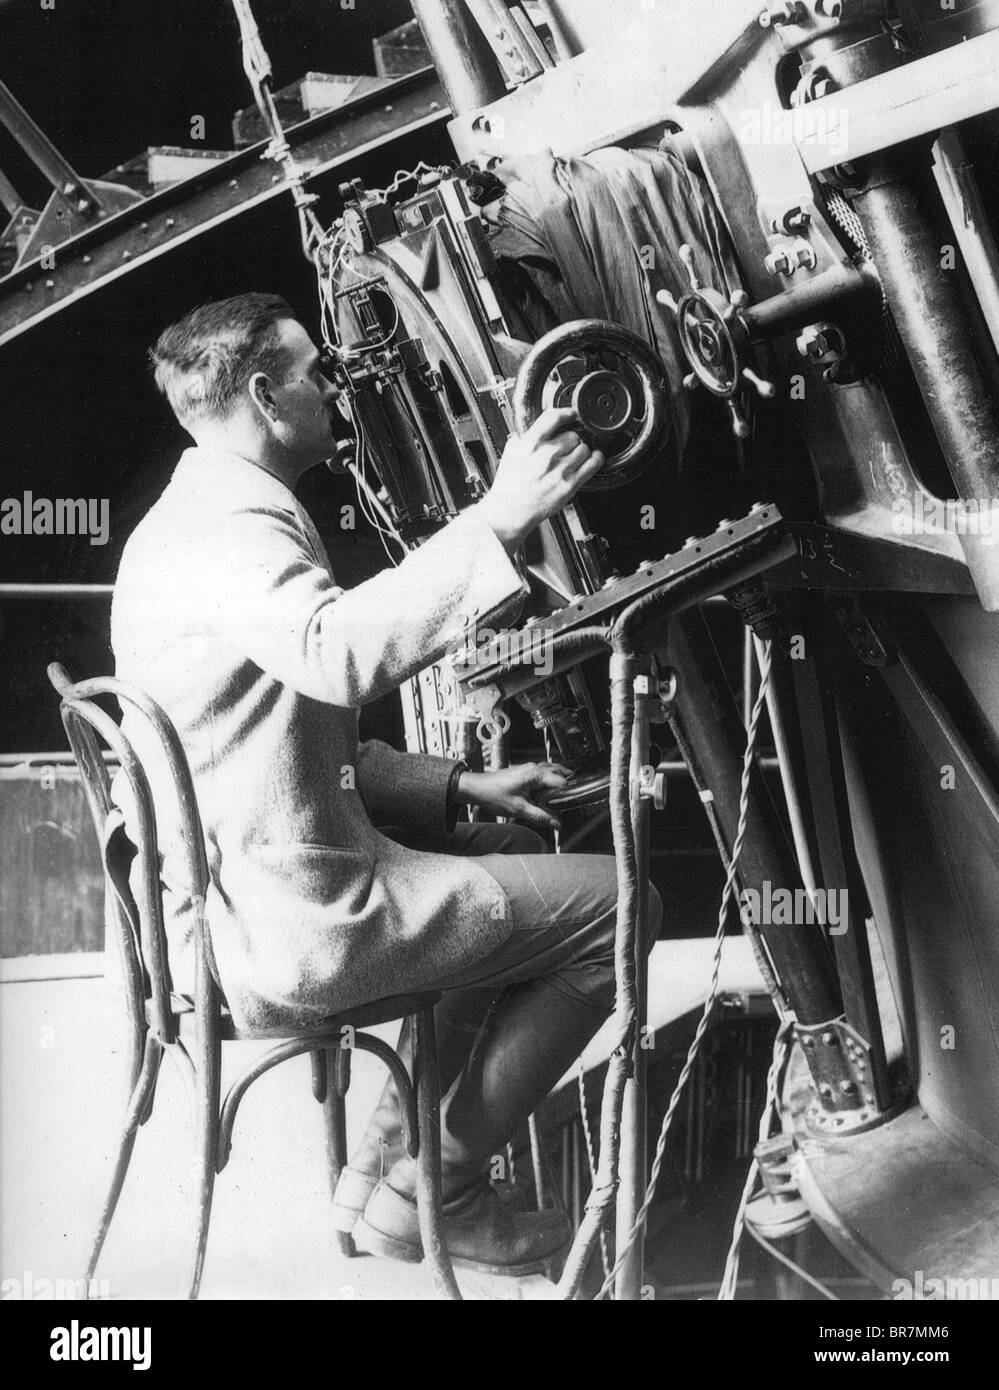 edwin hubble with his telescope